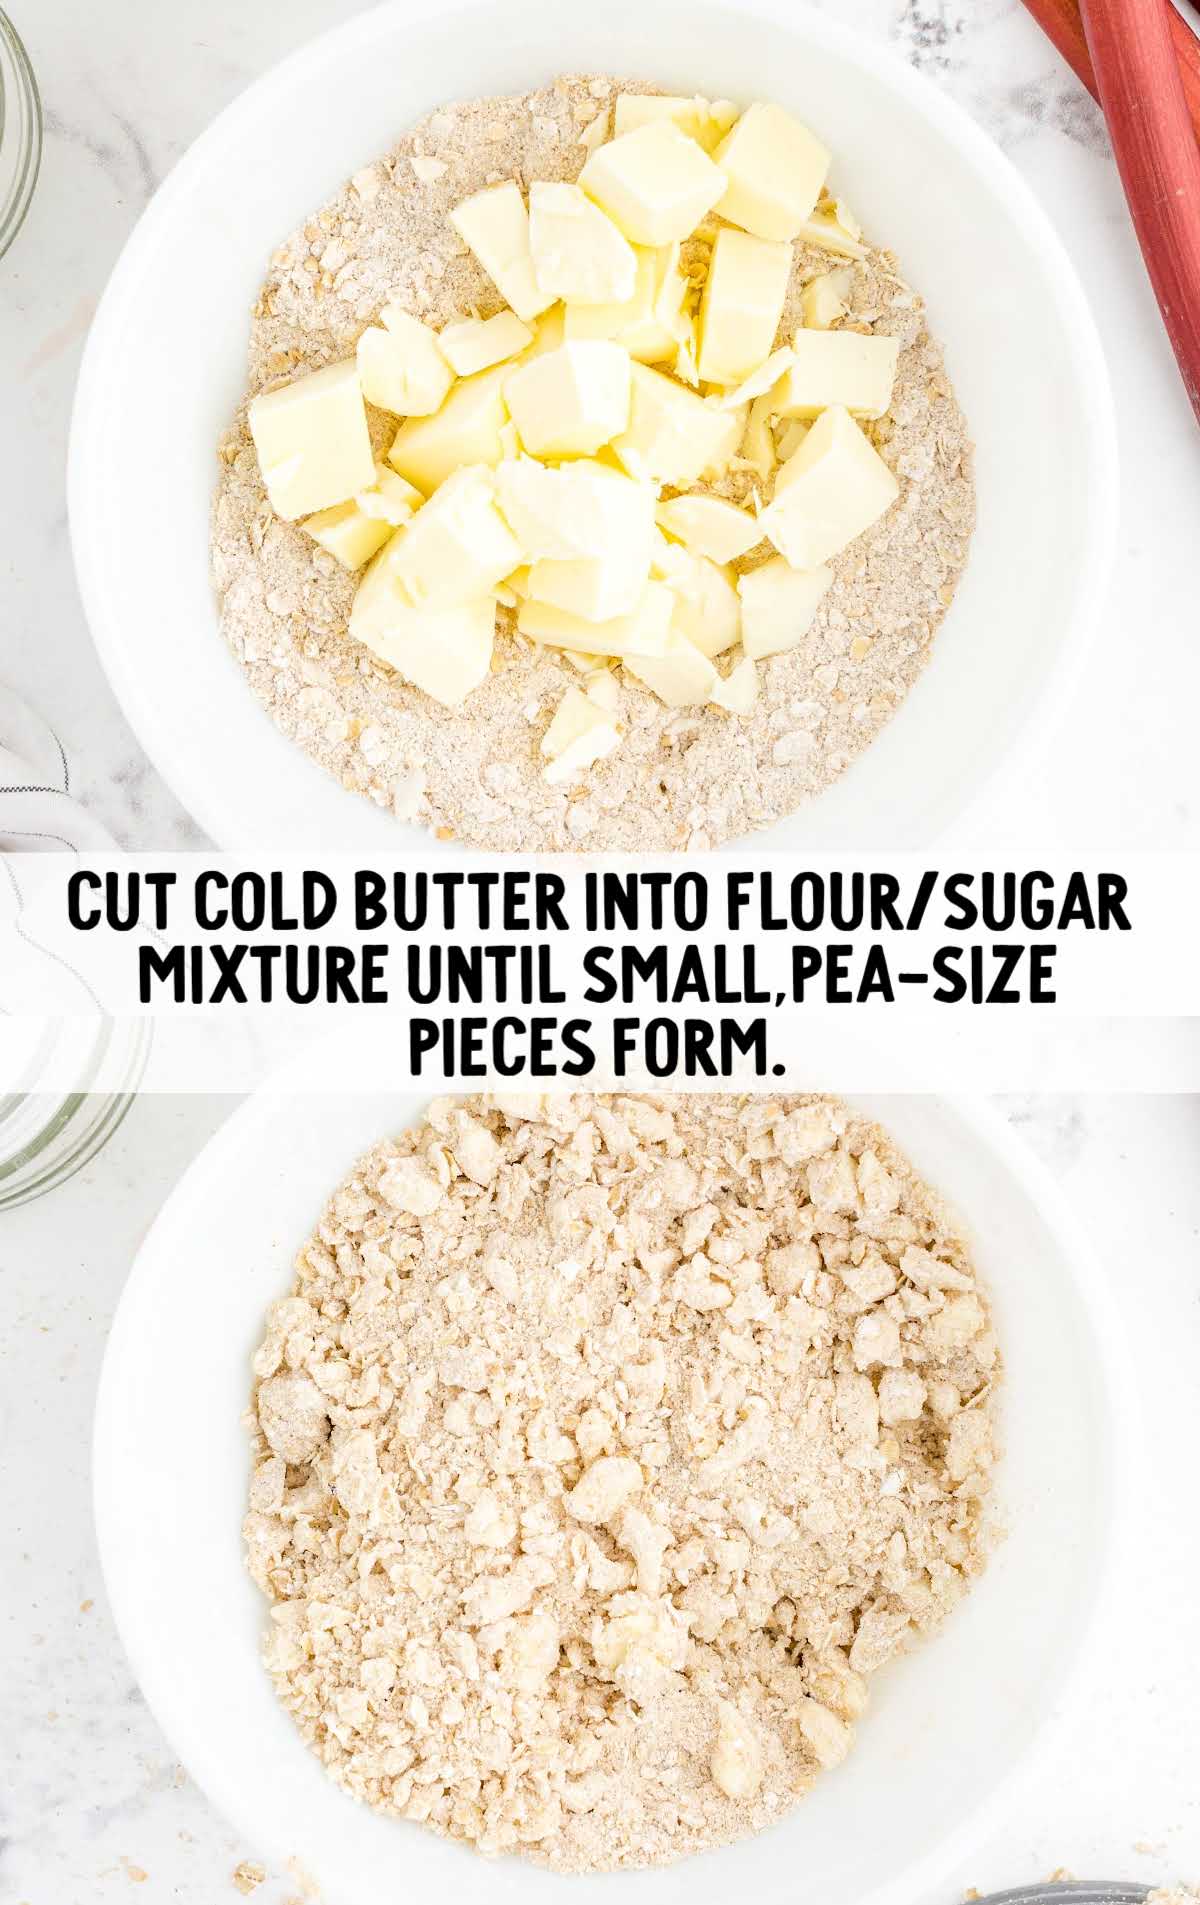 cold butter mixed with flour/sugar mixture in bowl